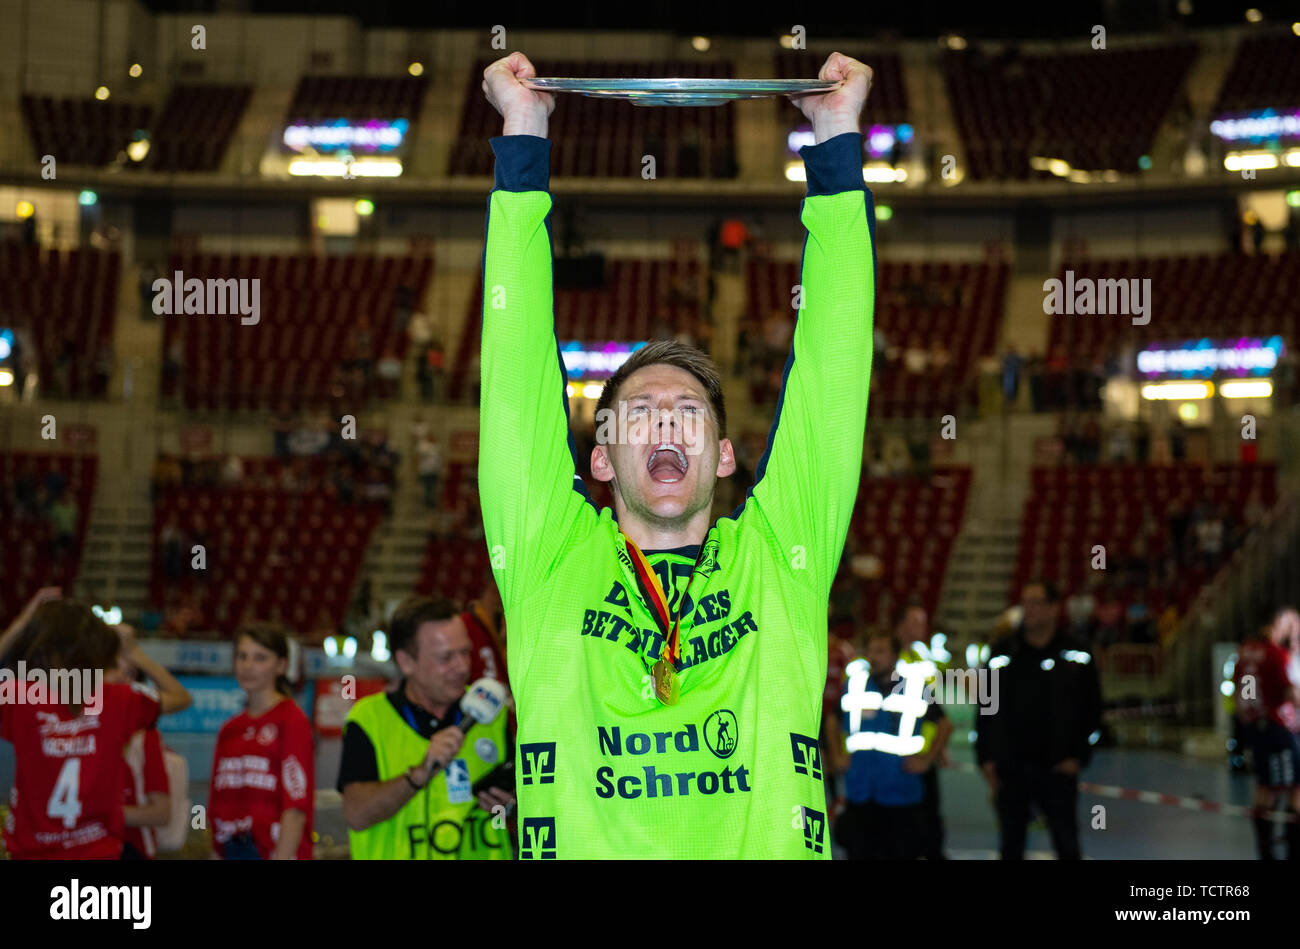 Duesseldorf, Germany. 09th June, 2019. Handball: Bundesliga, Bergischer HC - SG Flensburg-Handewitt, 34th matchday at the ISS Dome, Düsseldorf. Flensburgs Torbjorn Bergerud cheers after the game with the championship bowl in his hand. Credit: Guido Kirchner/dpa/Alamy Live News Stock Photo